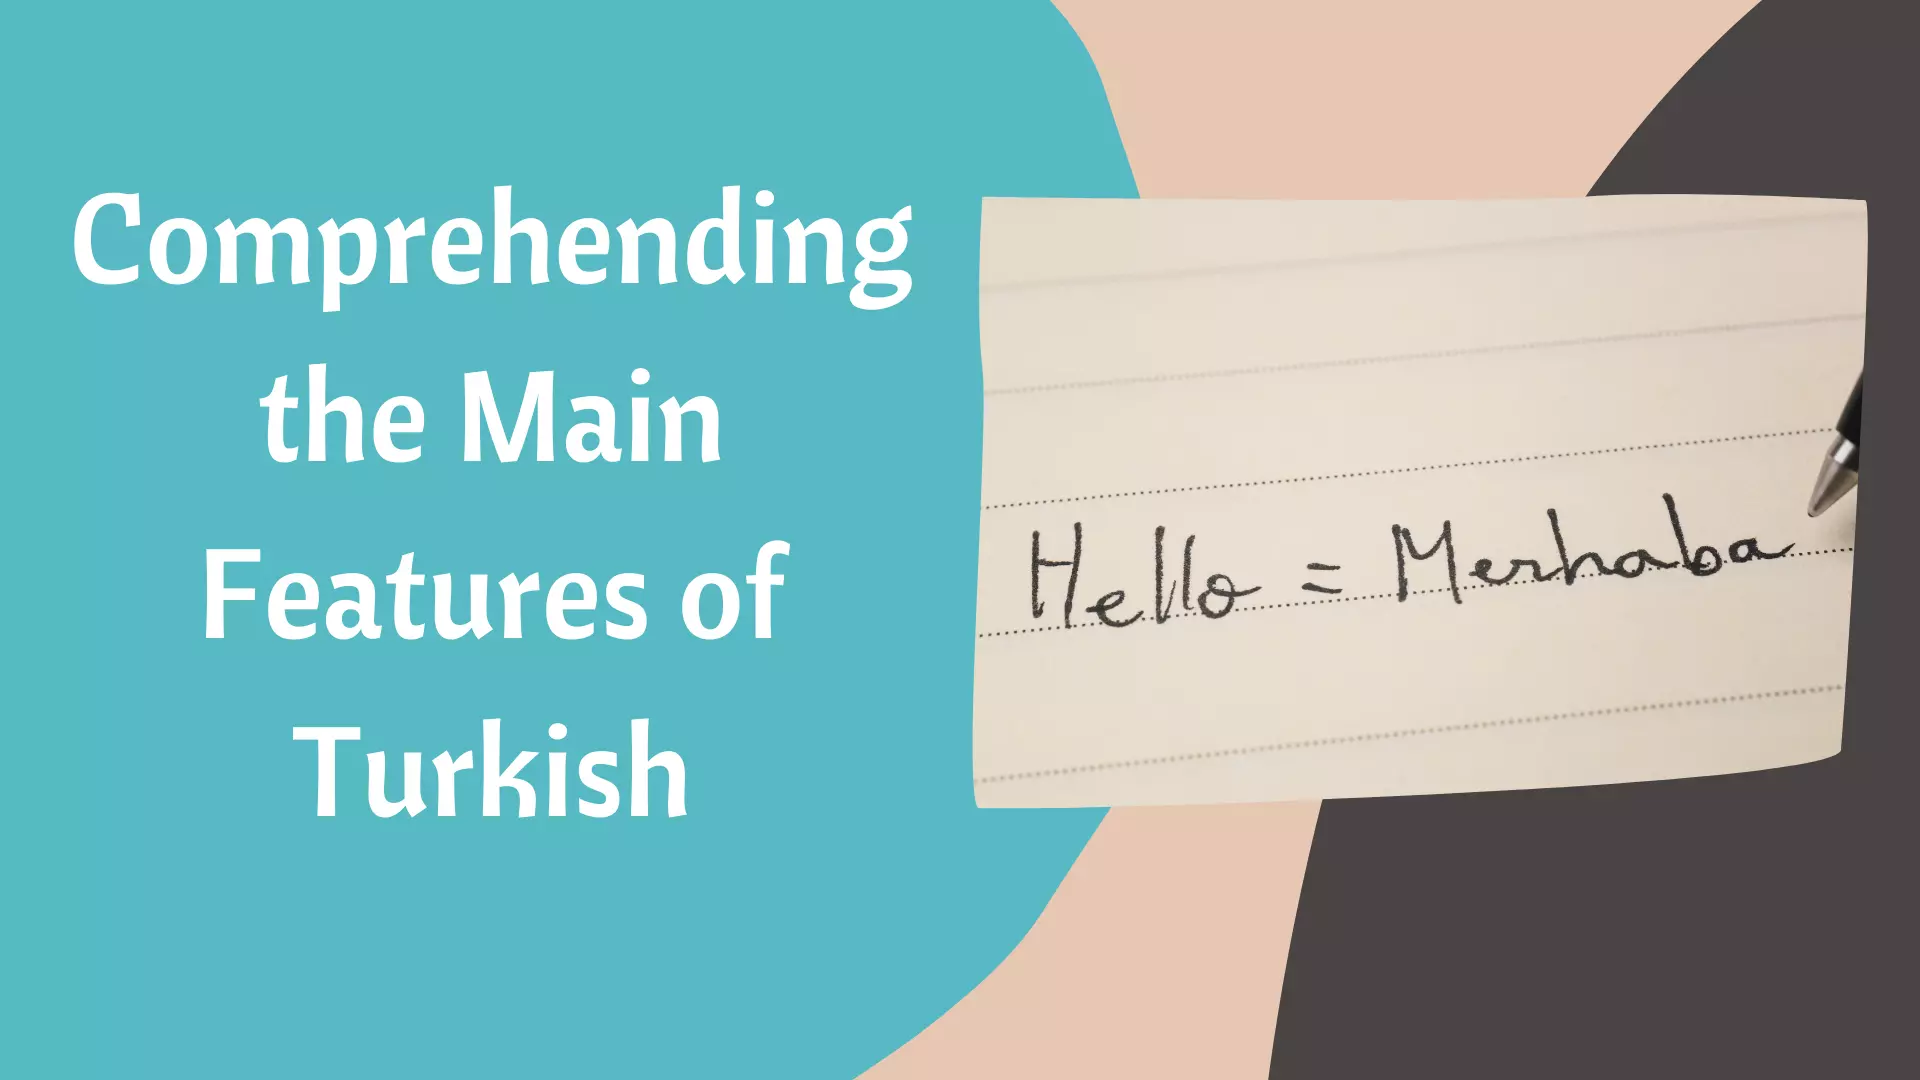 Comprehending the Main Features of Turkish